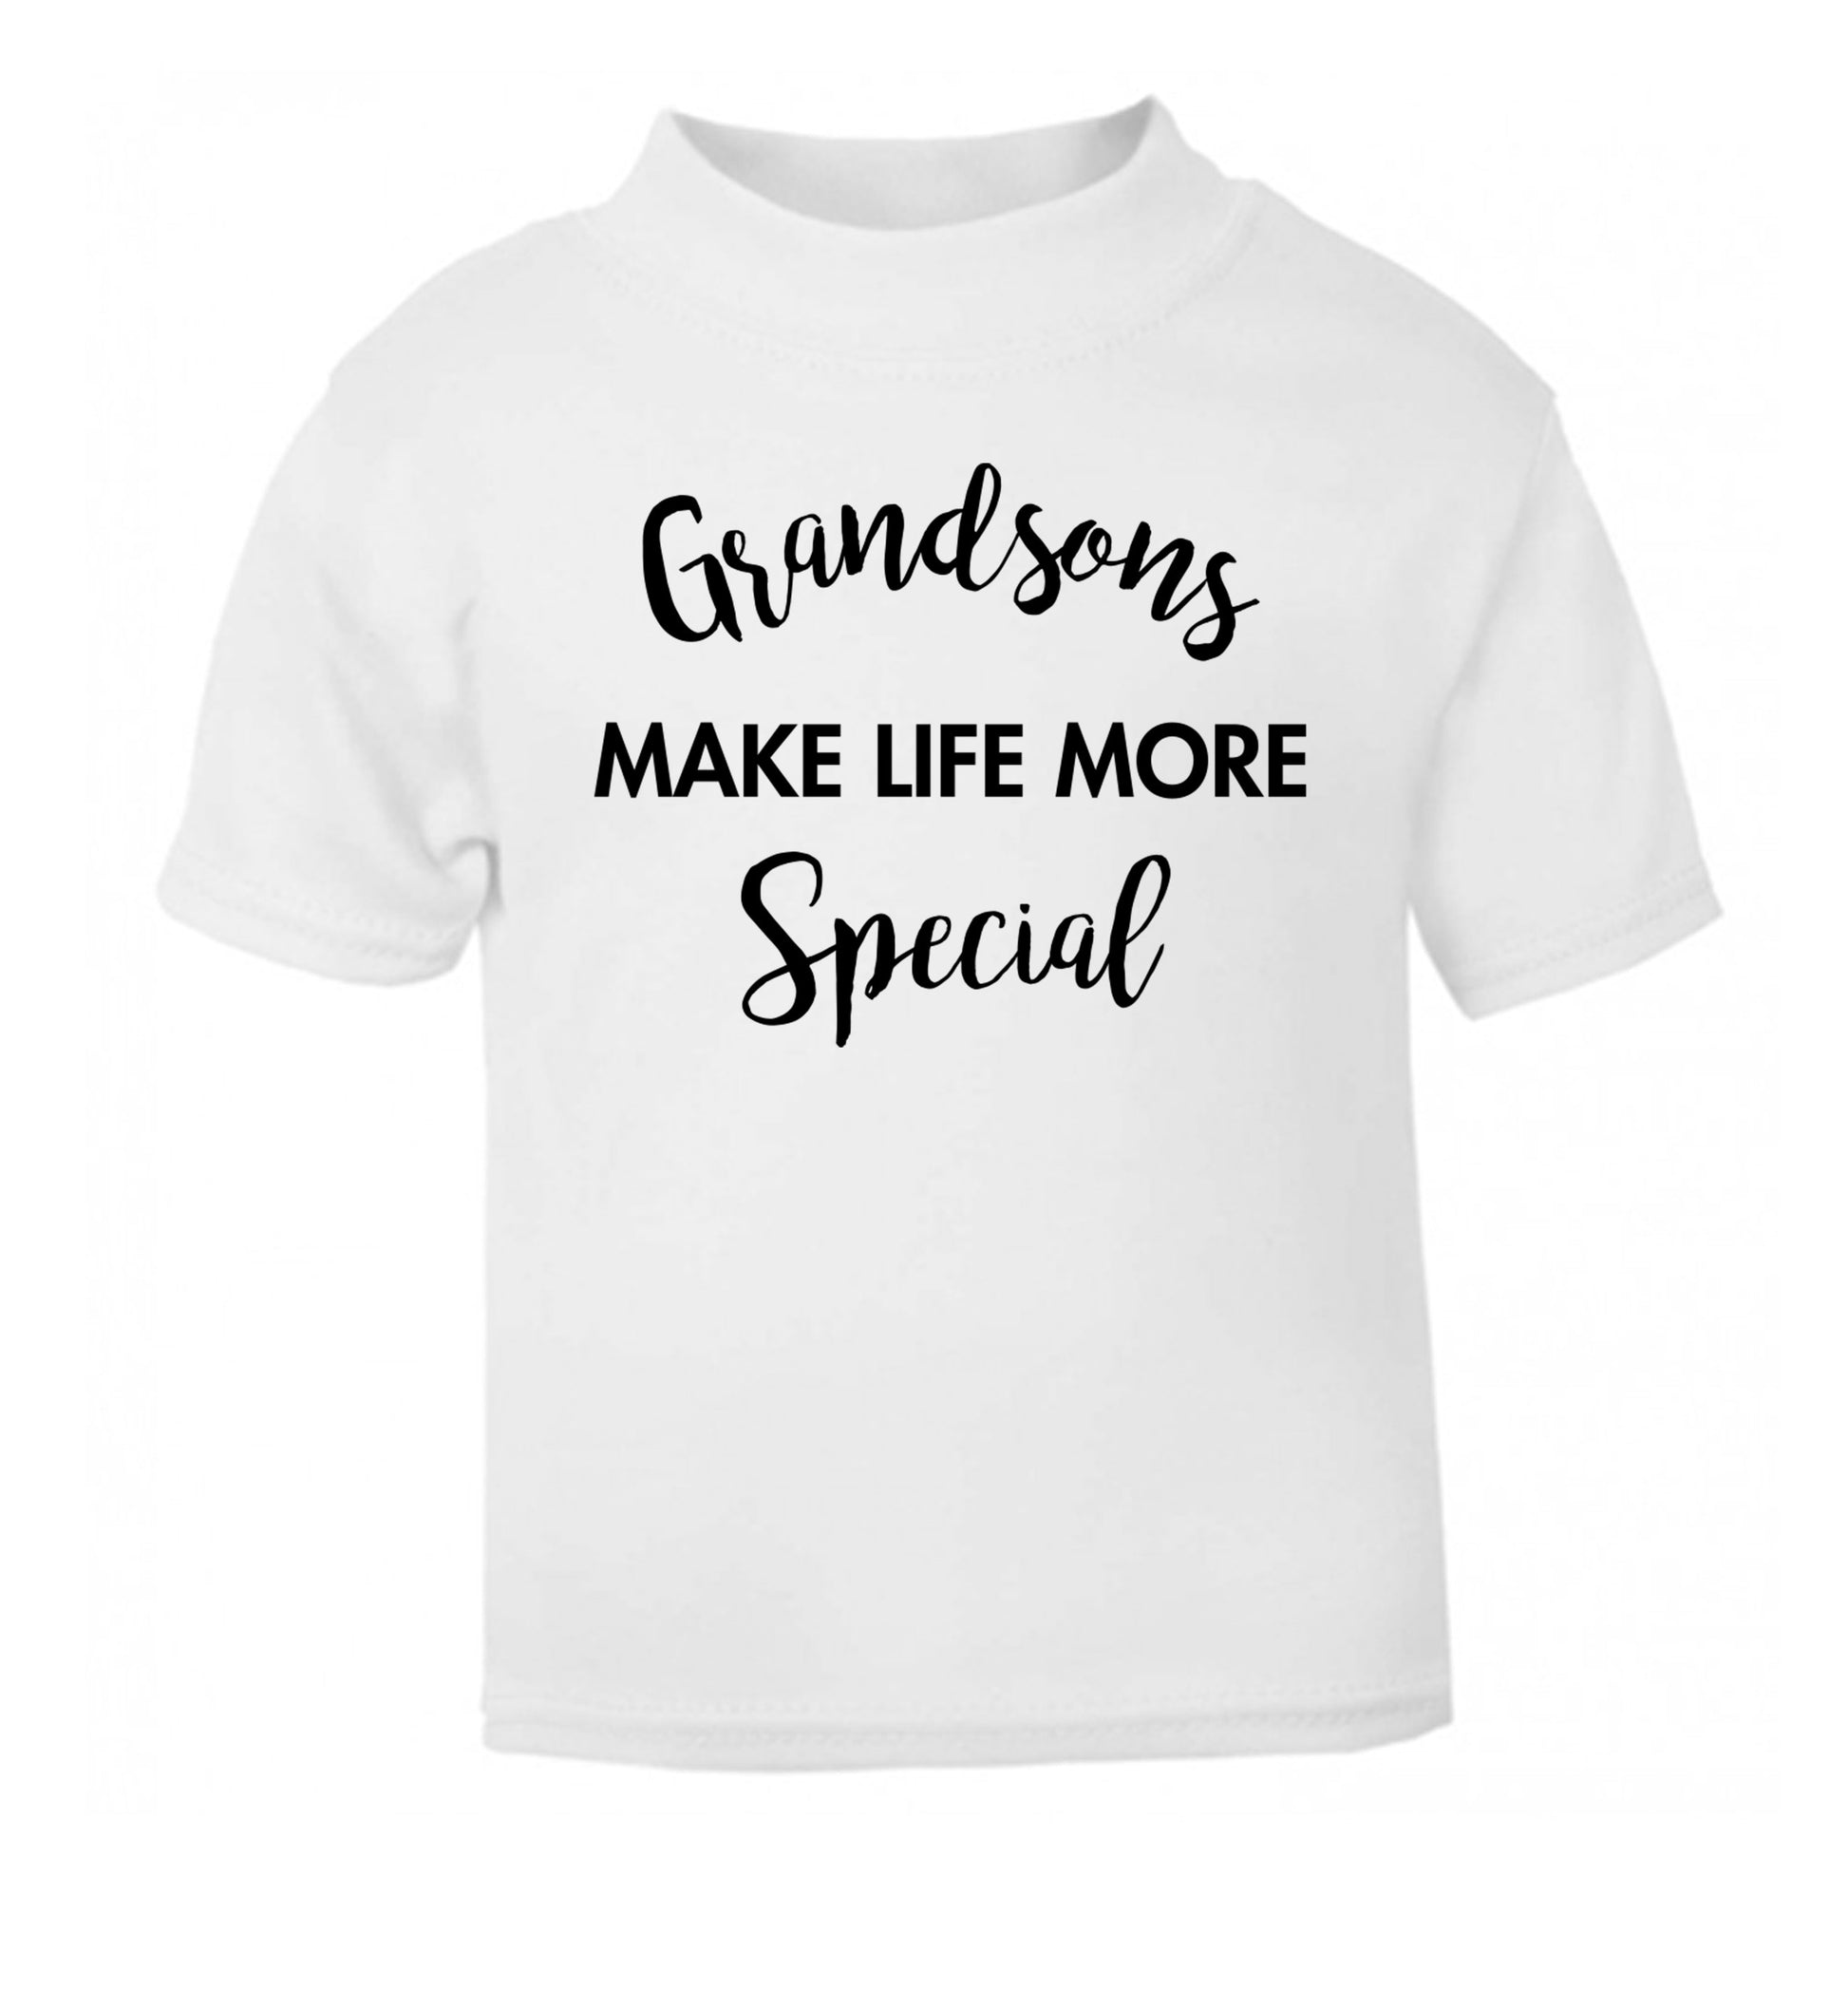 Grandsons make life more special white Baby Toddler Tshirt 2 Years